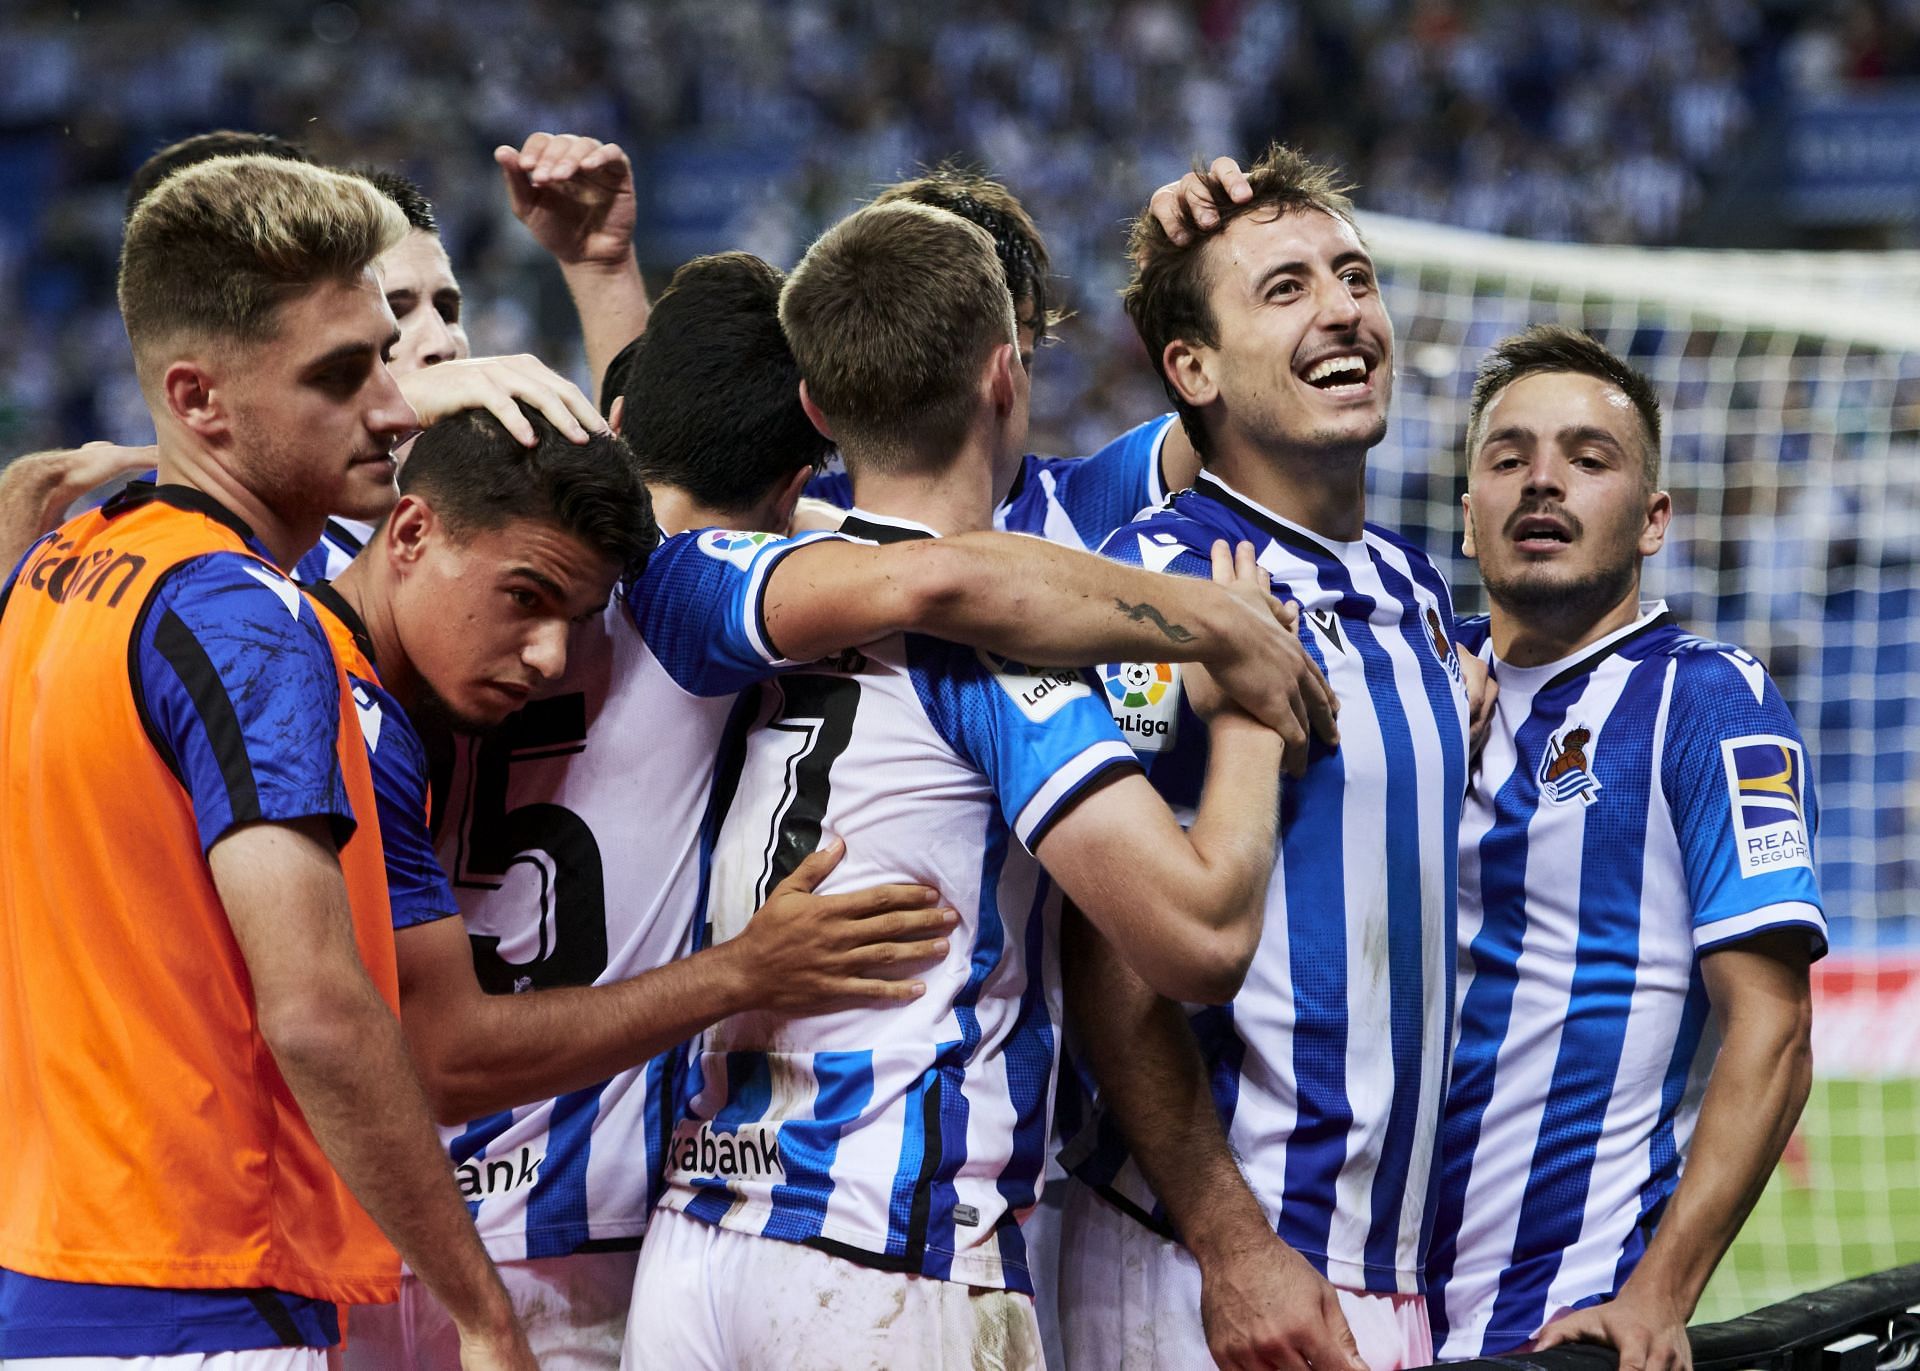 La Liga roundup: Real Sociedad stays fourth with win at Elche